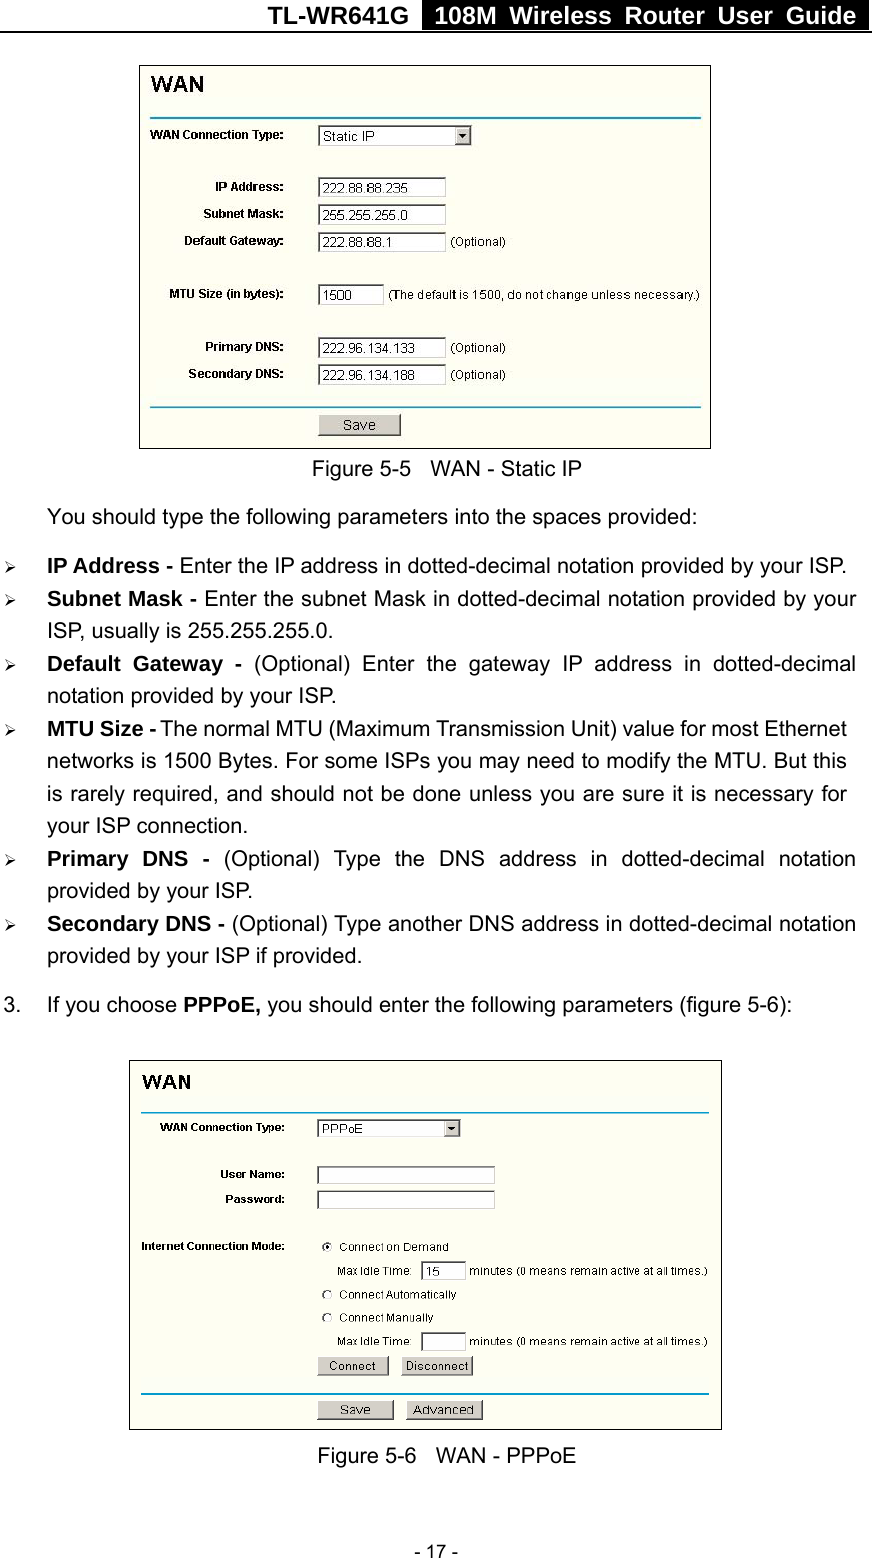 TL-WR641G   108M Wireless Router User Guide   - 17 - Figure 5-5  WAN - Static IP You should type the following parameters into the spaces provided: ¾ IP Address - Enter the IP address in dotted-decimal notation provided by your ISP. ¾ Subnet Mask - Enter the subnet Mask in dotted-decimal notation provided by your ISP, usually is 255.255.255.0. ¾ Default Gateway - (Optional) Enter the gateway IP address in dotted-decimal notation provided by your ISP. ¾ MTU Size - The normal MTU (Maximum Transmission Unit) value for most Ethernet networks is 1500 Bytes. For some ISPs you may need to modify the MTU. But this is rarely required, and should not be done unless you are sure it is necessary for your ISP connection. ¾ Primary DNS - (Optional) Type the DNS address in dotted-decimal notation provided by your ISP. ¾ Secondary DNS - (Optional) Type another DNS address in dotted-decimal notation provided by your ISP if provided. 3.  If you choose PPPoE, you should enter the following parameters (figure 5-6):    Figure 5-6  WAN - PPPoE 